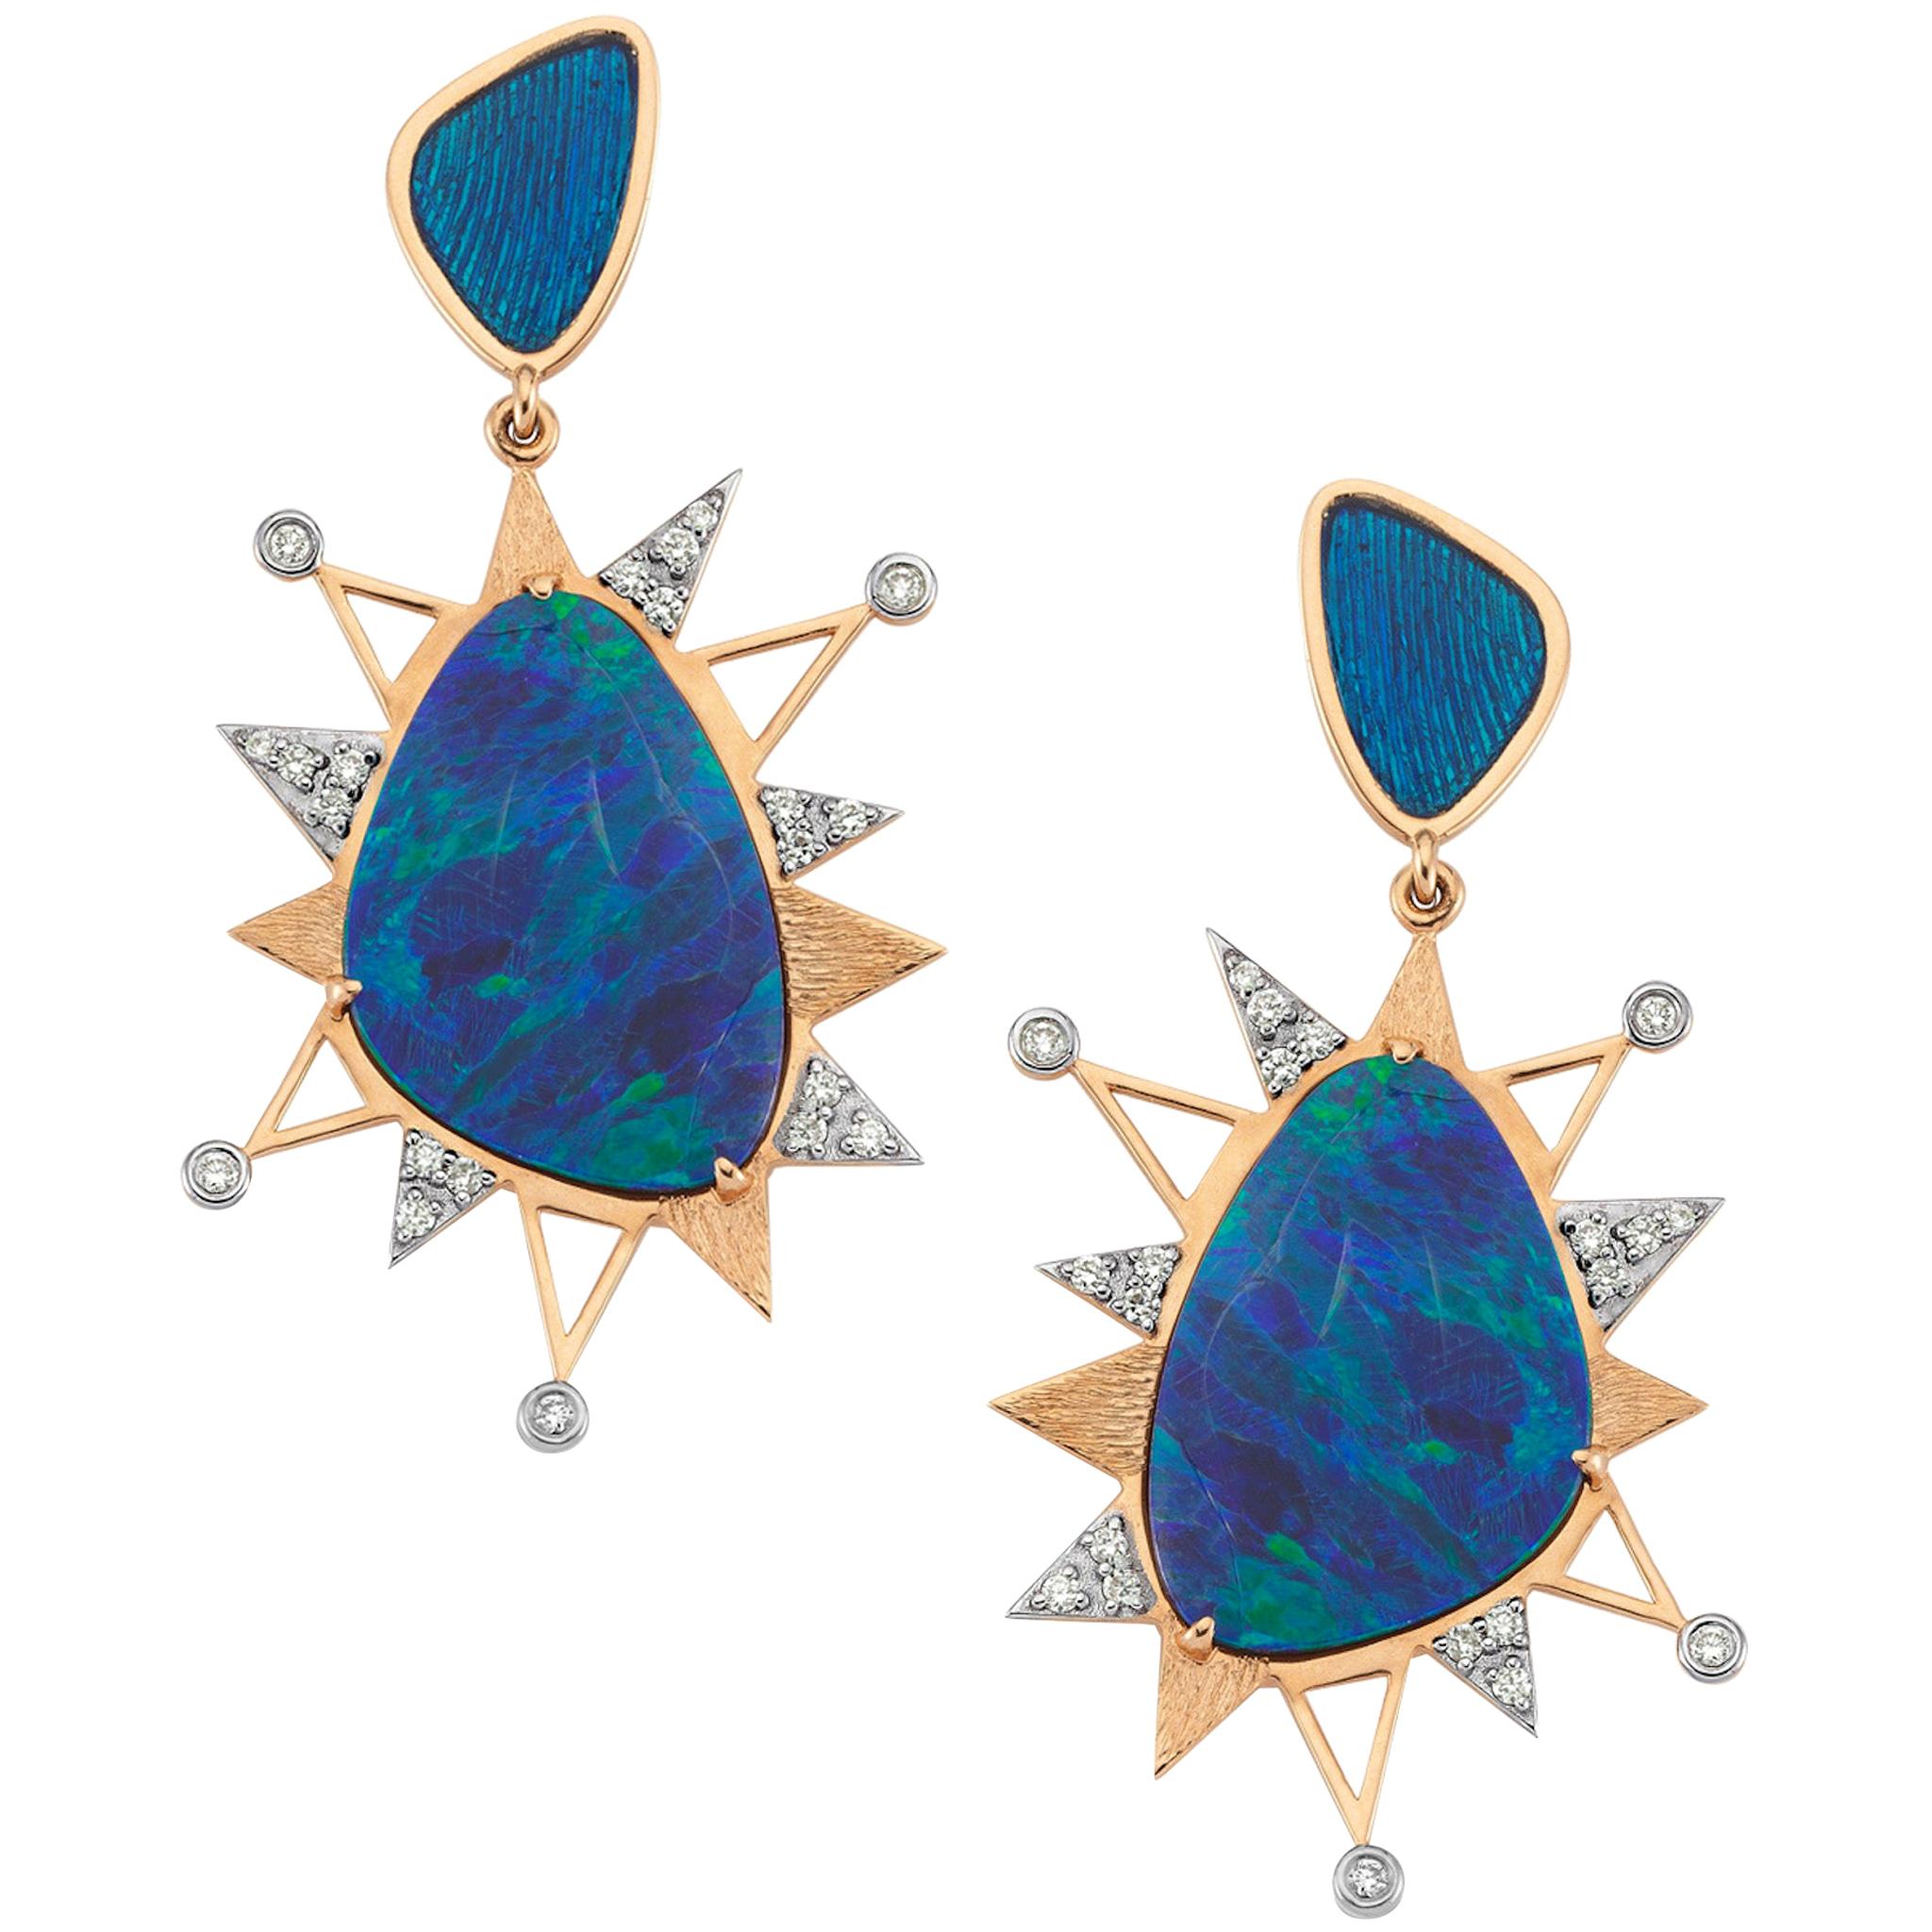 Urania 14k Rose Gold Earrings with Opal and Diamonds